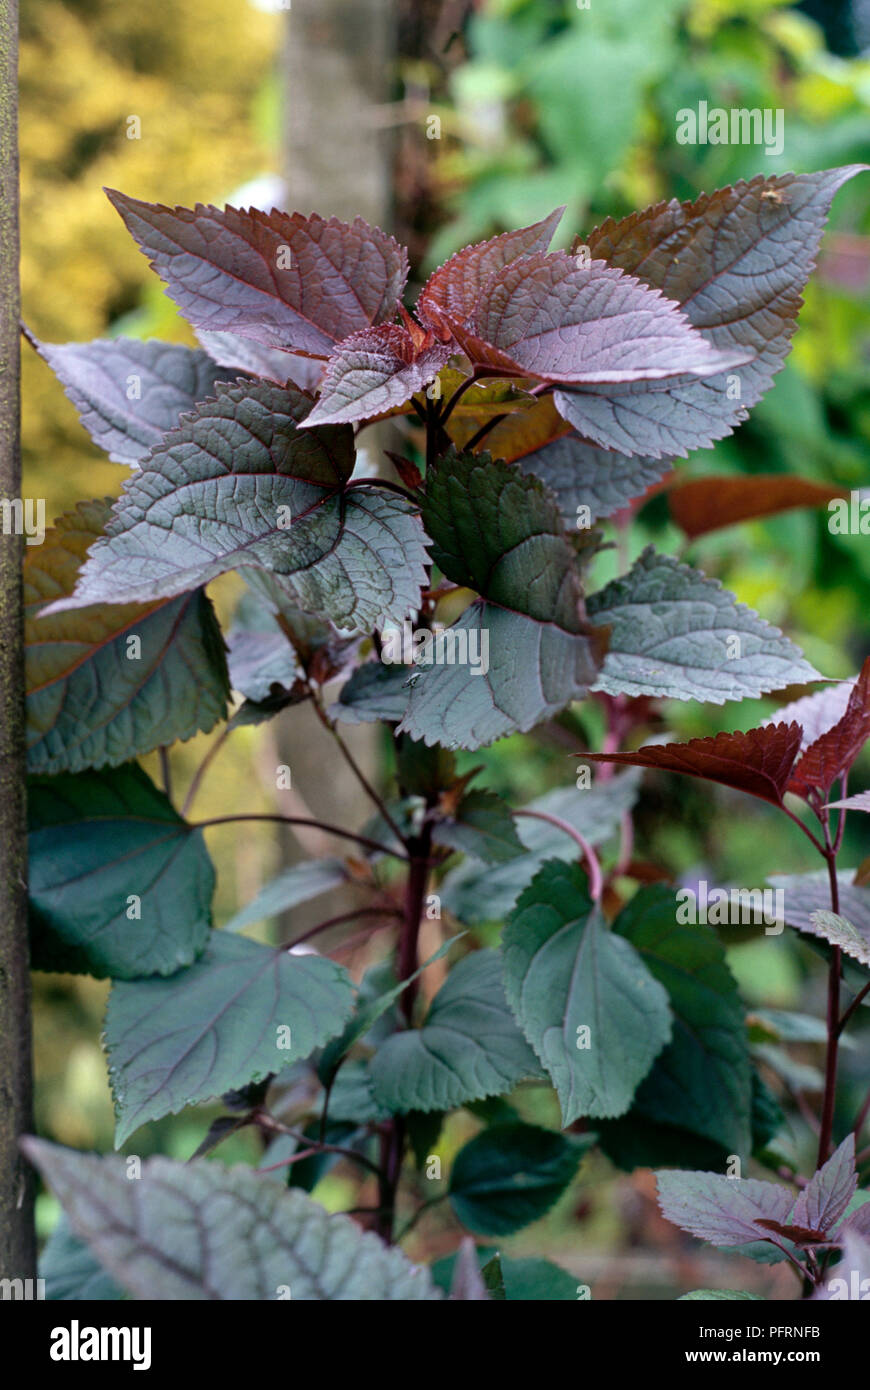 Eupatorium rugosum 'Chocolate', syn. Ageratina altissima (White snakeroot), plant with serrated purple and green leaves Stock Photo